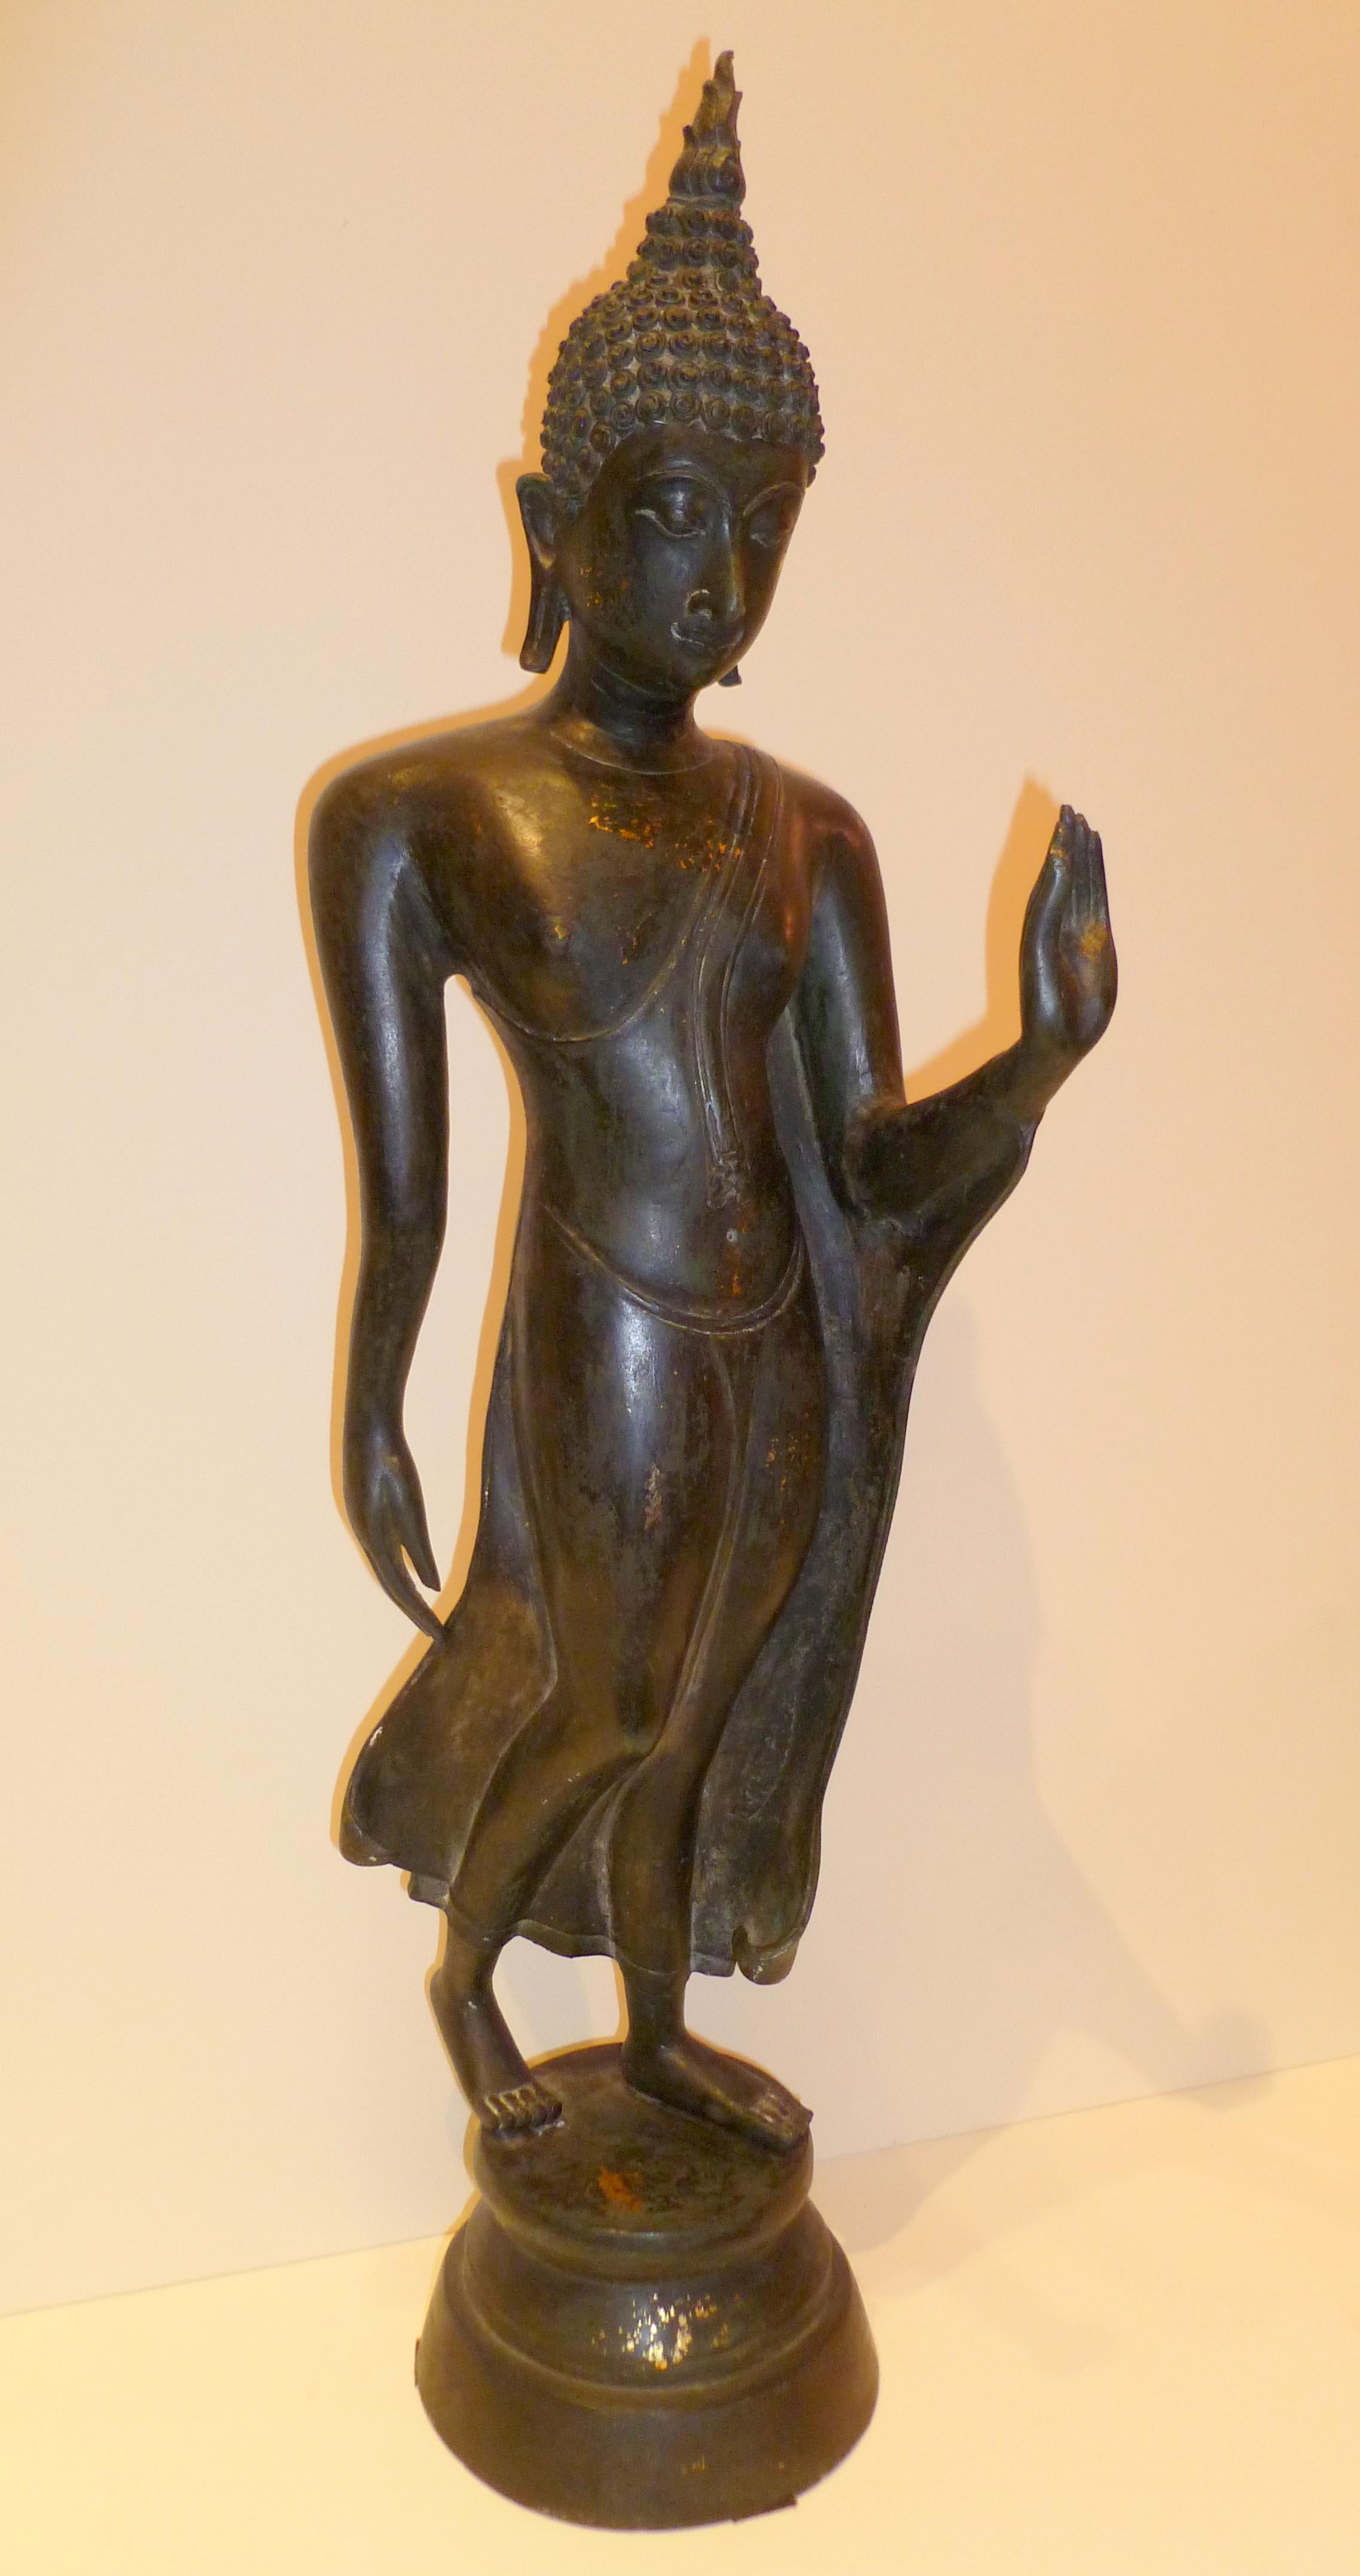 Thai standing bronze Buddha, benevolent facial expression, beautiful form and lines.